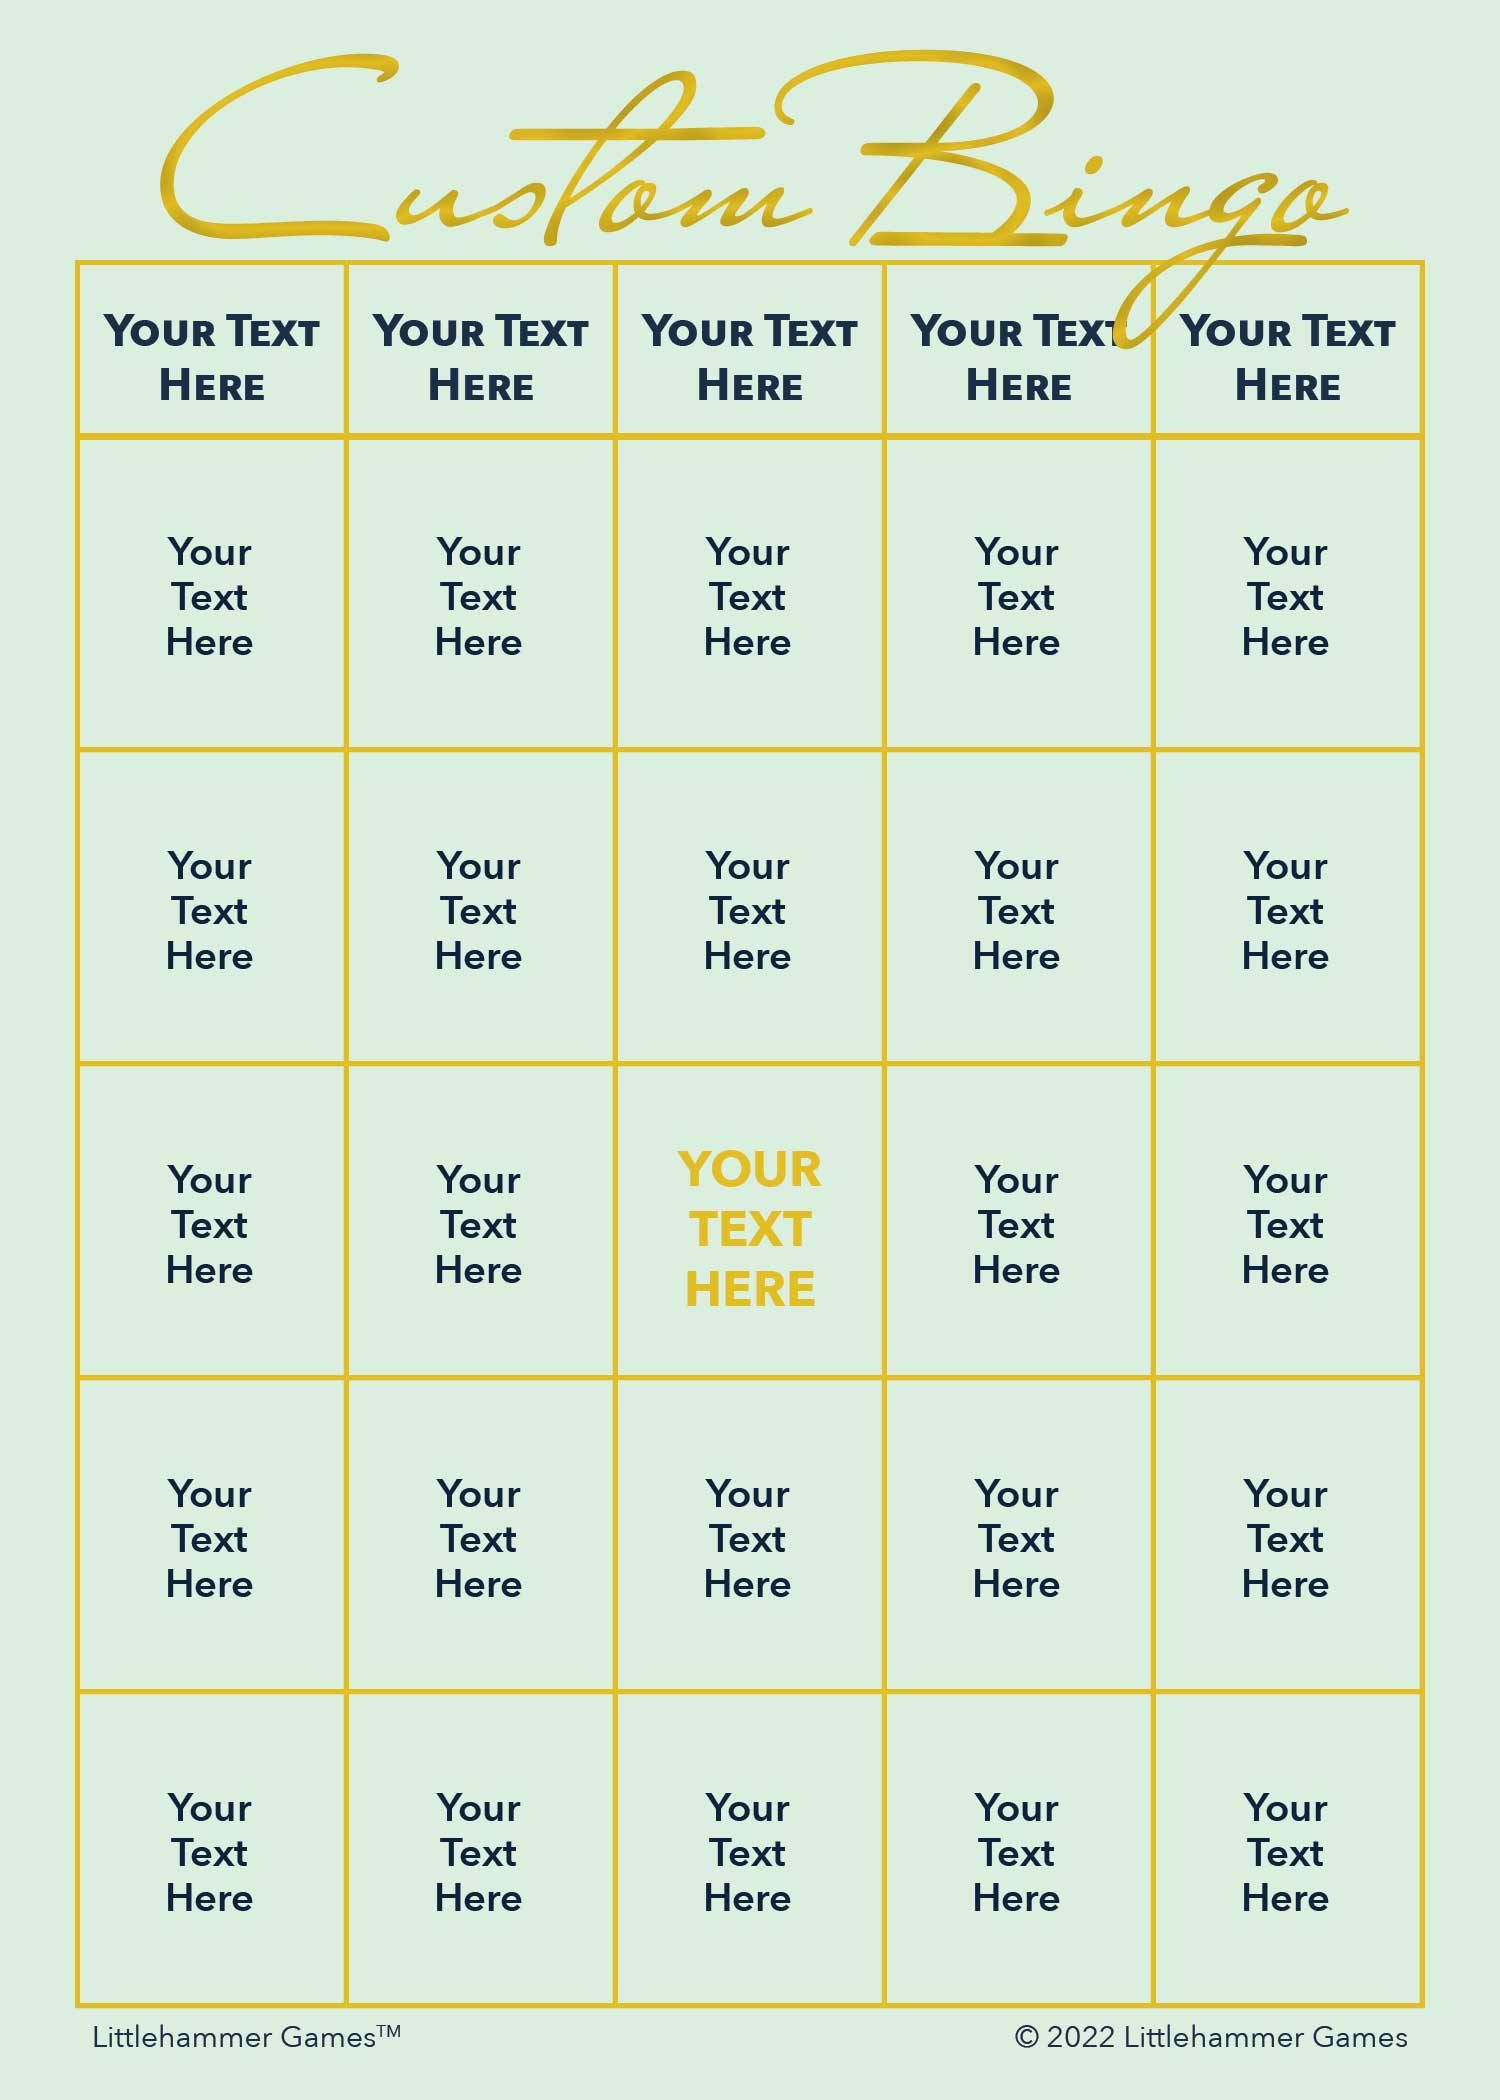 Custom Bingo game card with gold text on a mint background